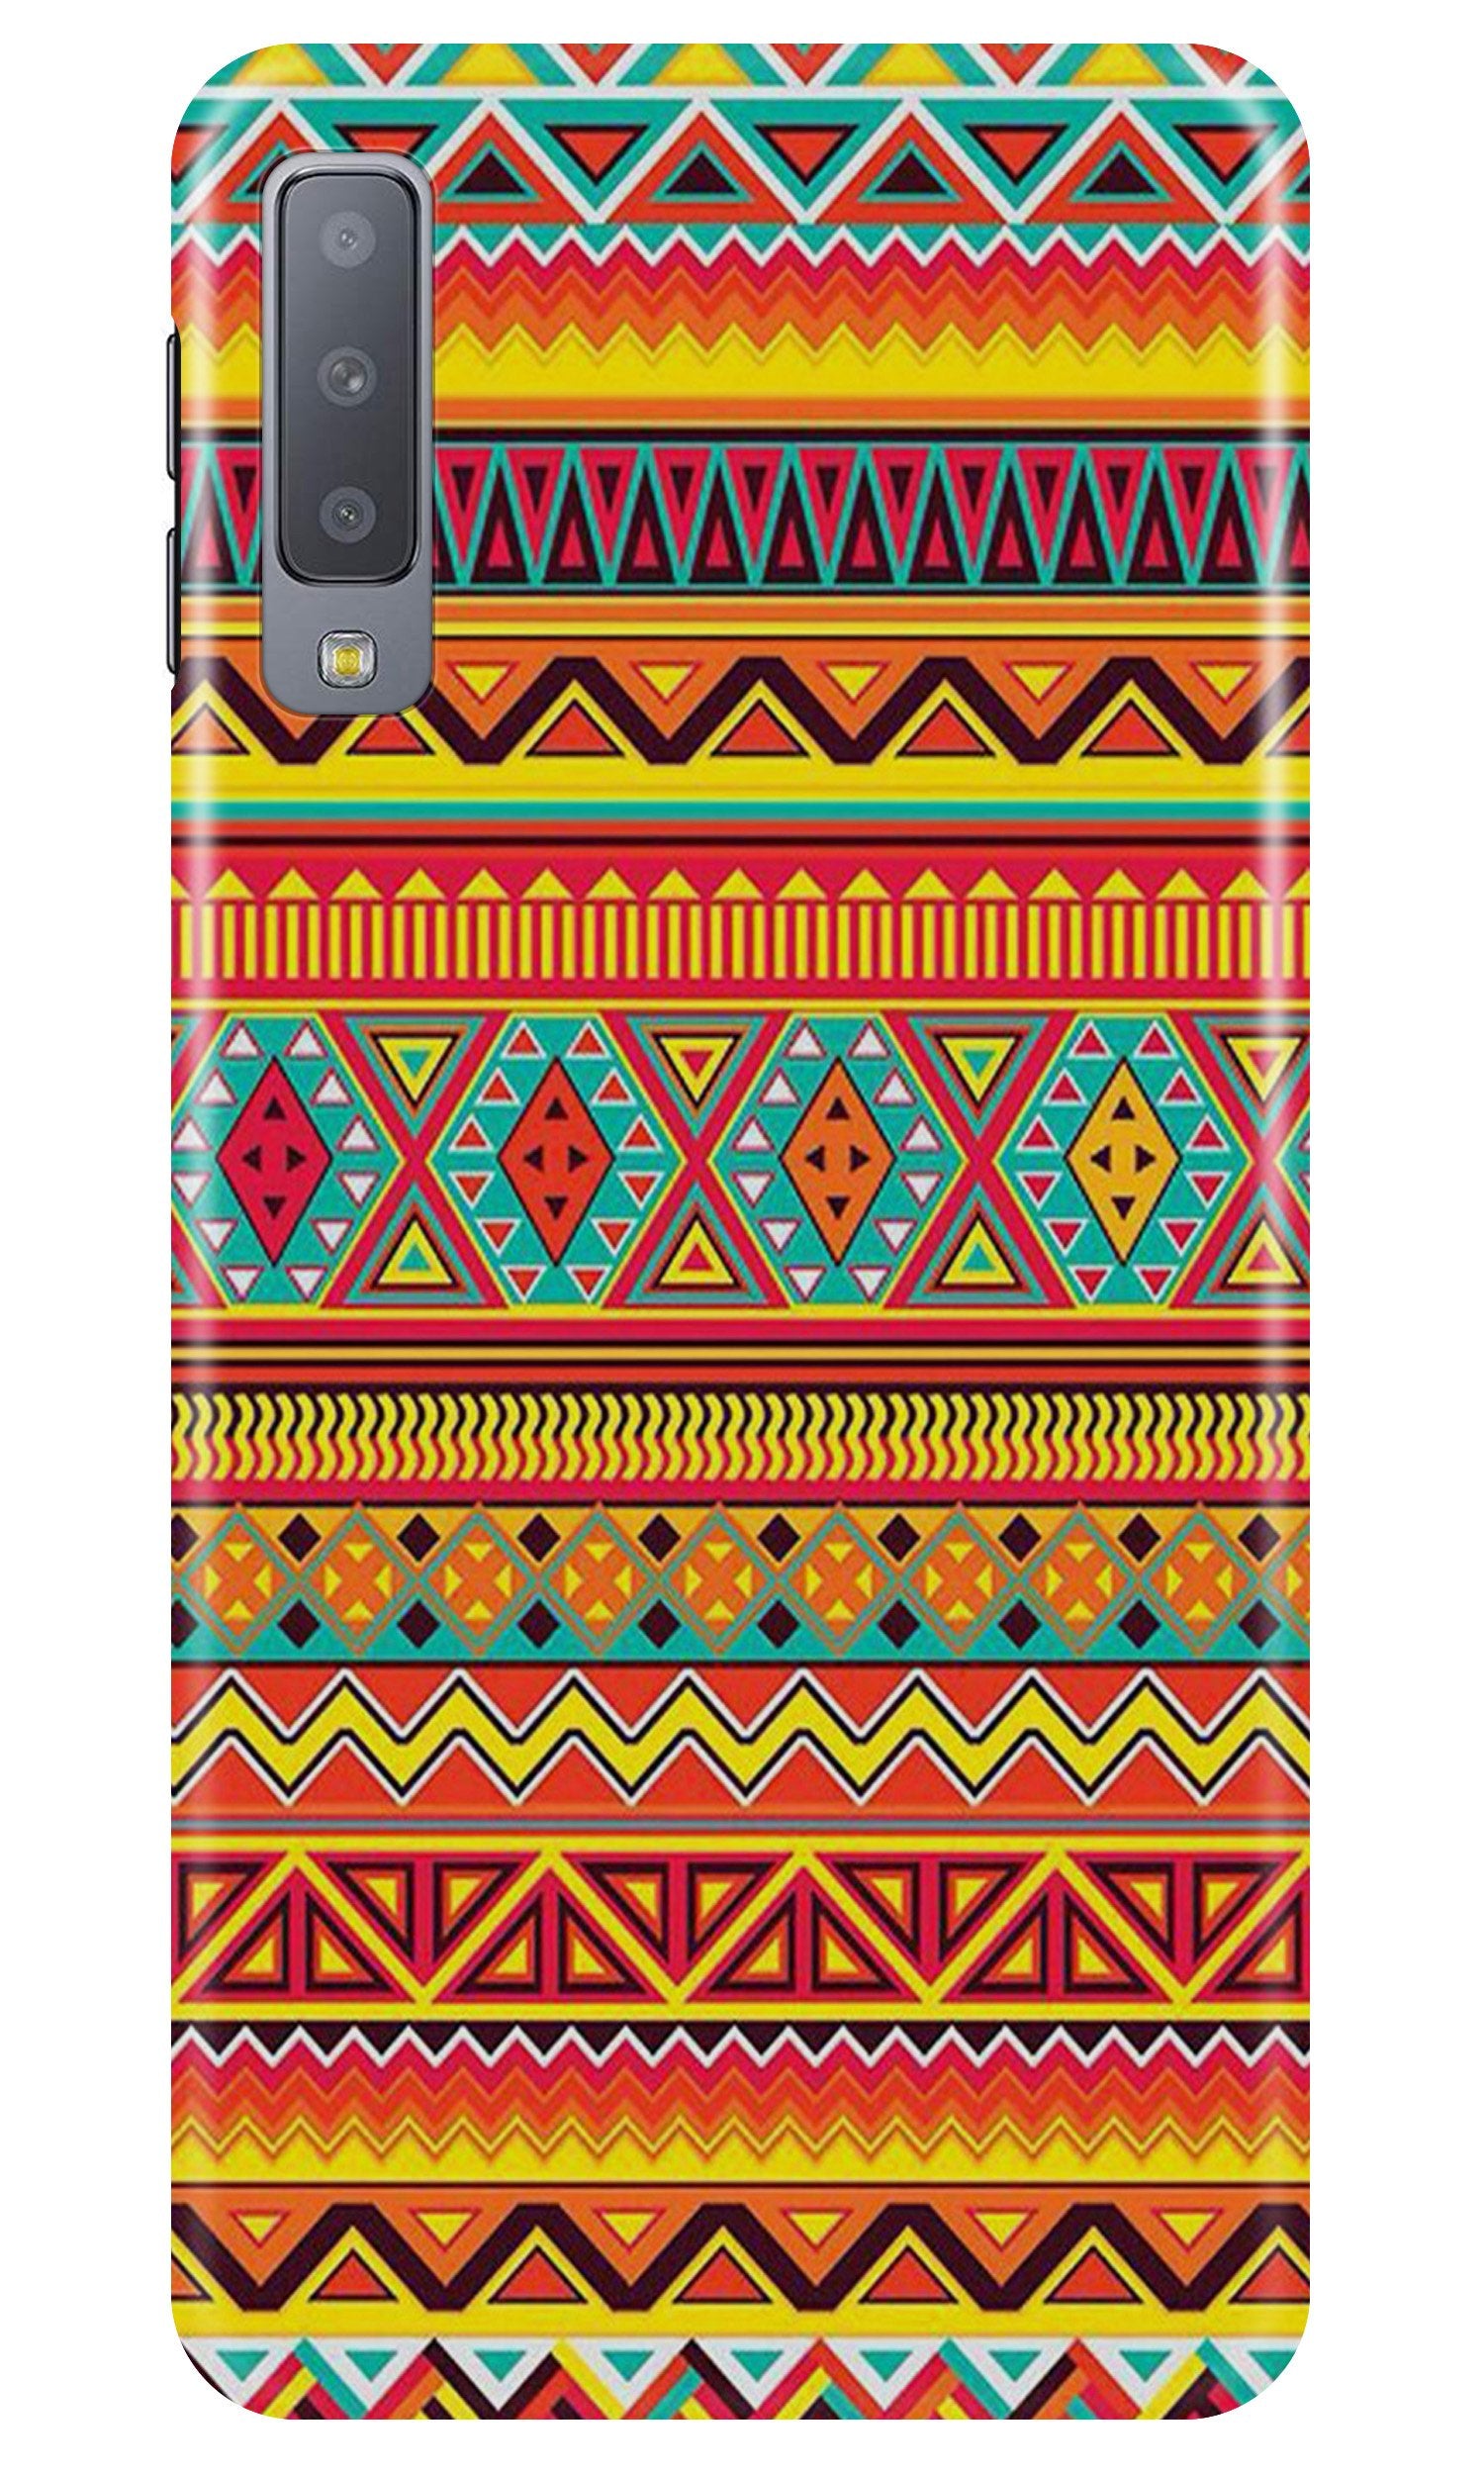 Zigzag line pattern Case for Samsung Galaxy A30s